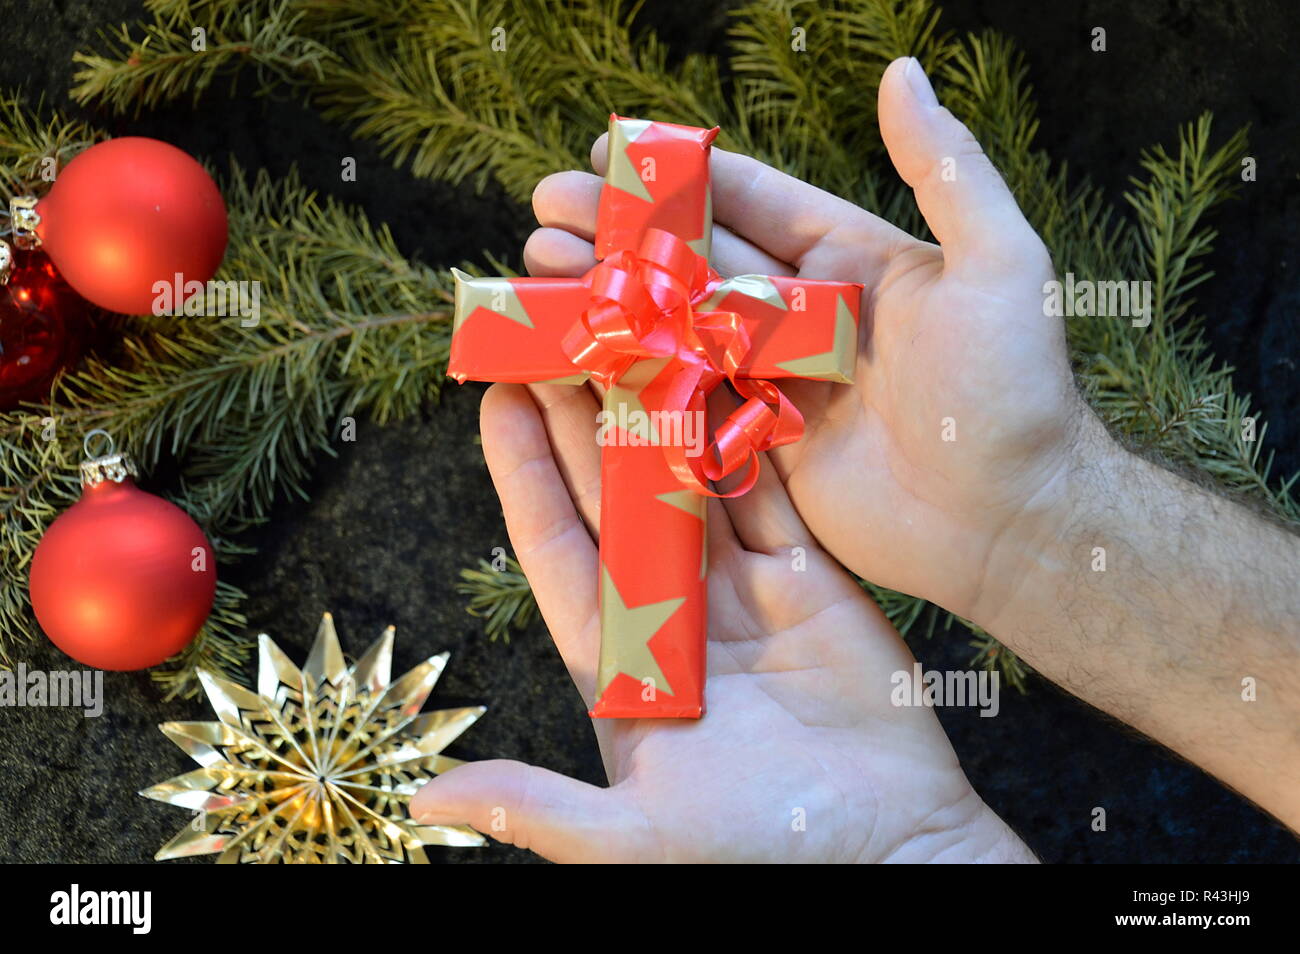 hands give away a boxed in gift paper cross on christmas Stock Photo